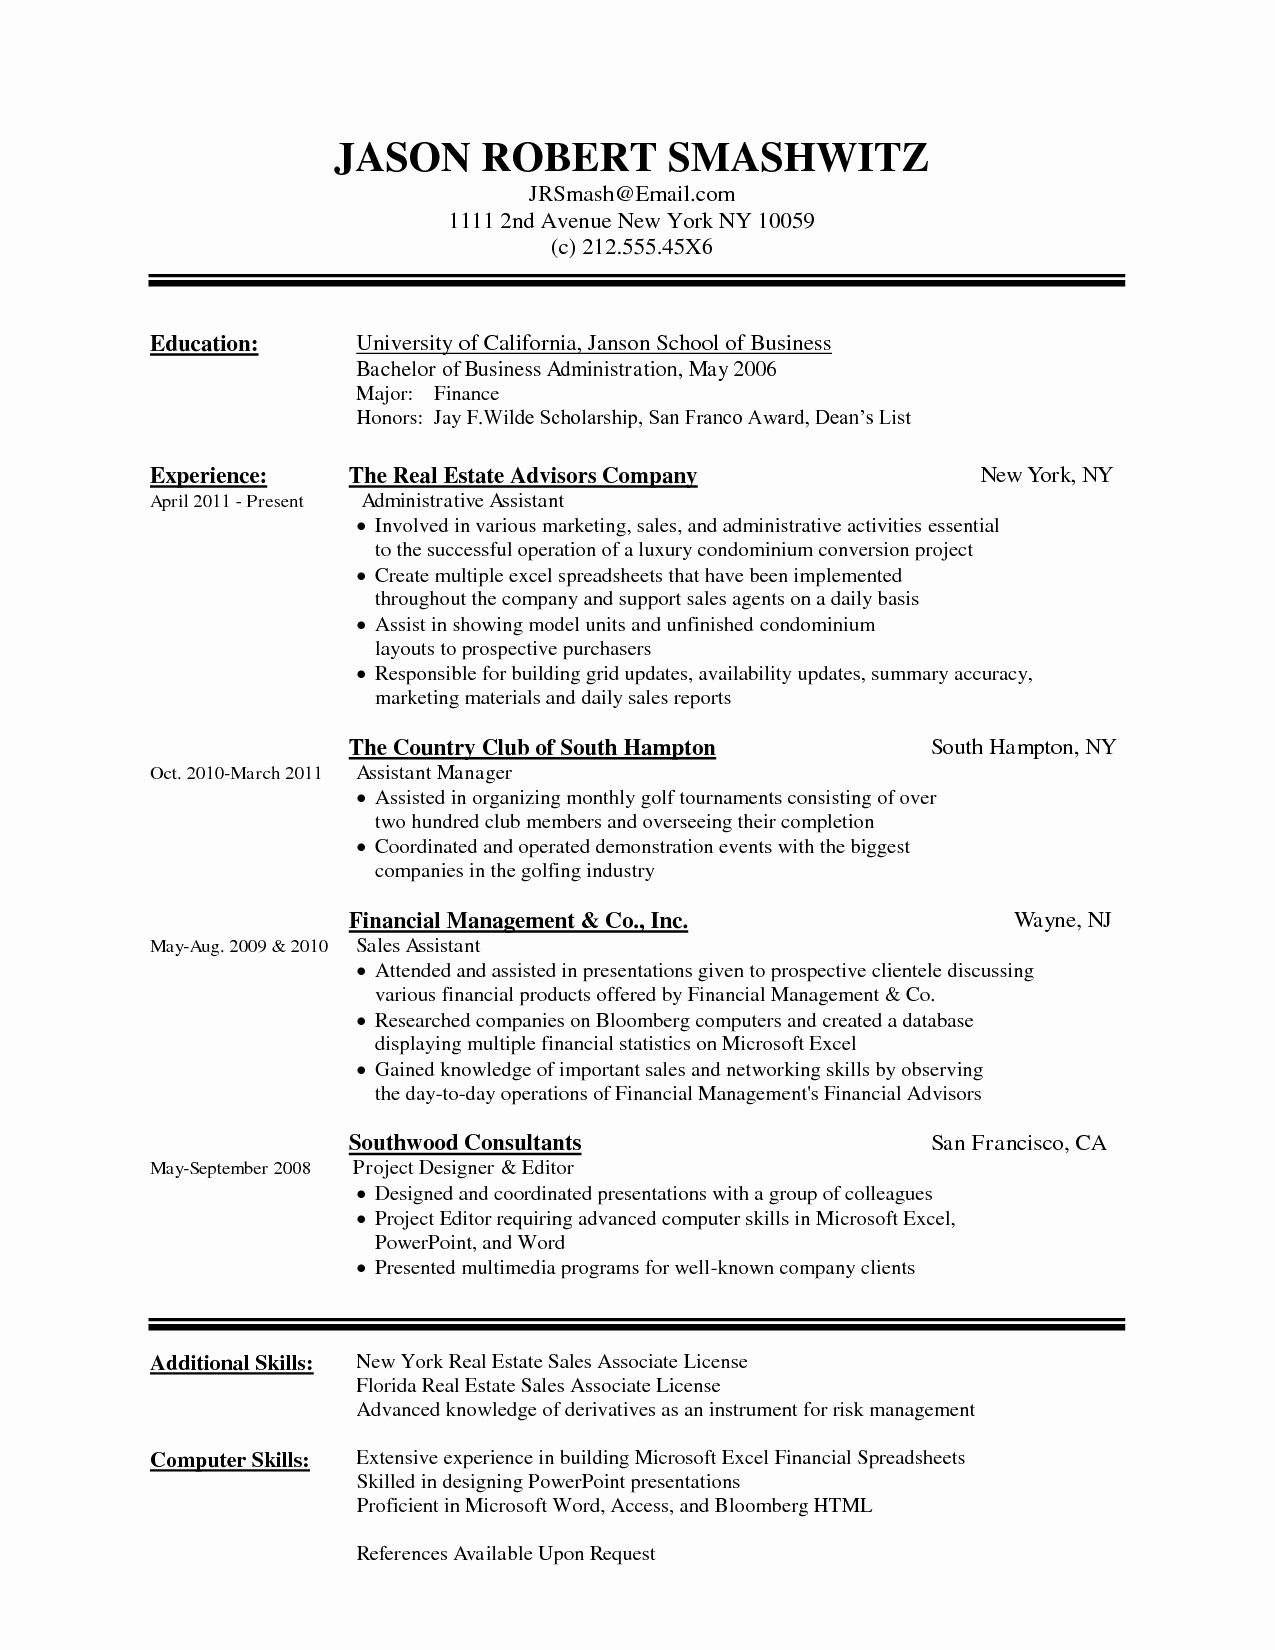 Microsoft Office Word Resume Template Awesome Microsoft Word Resume Templates